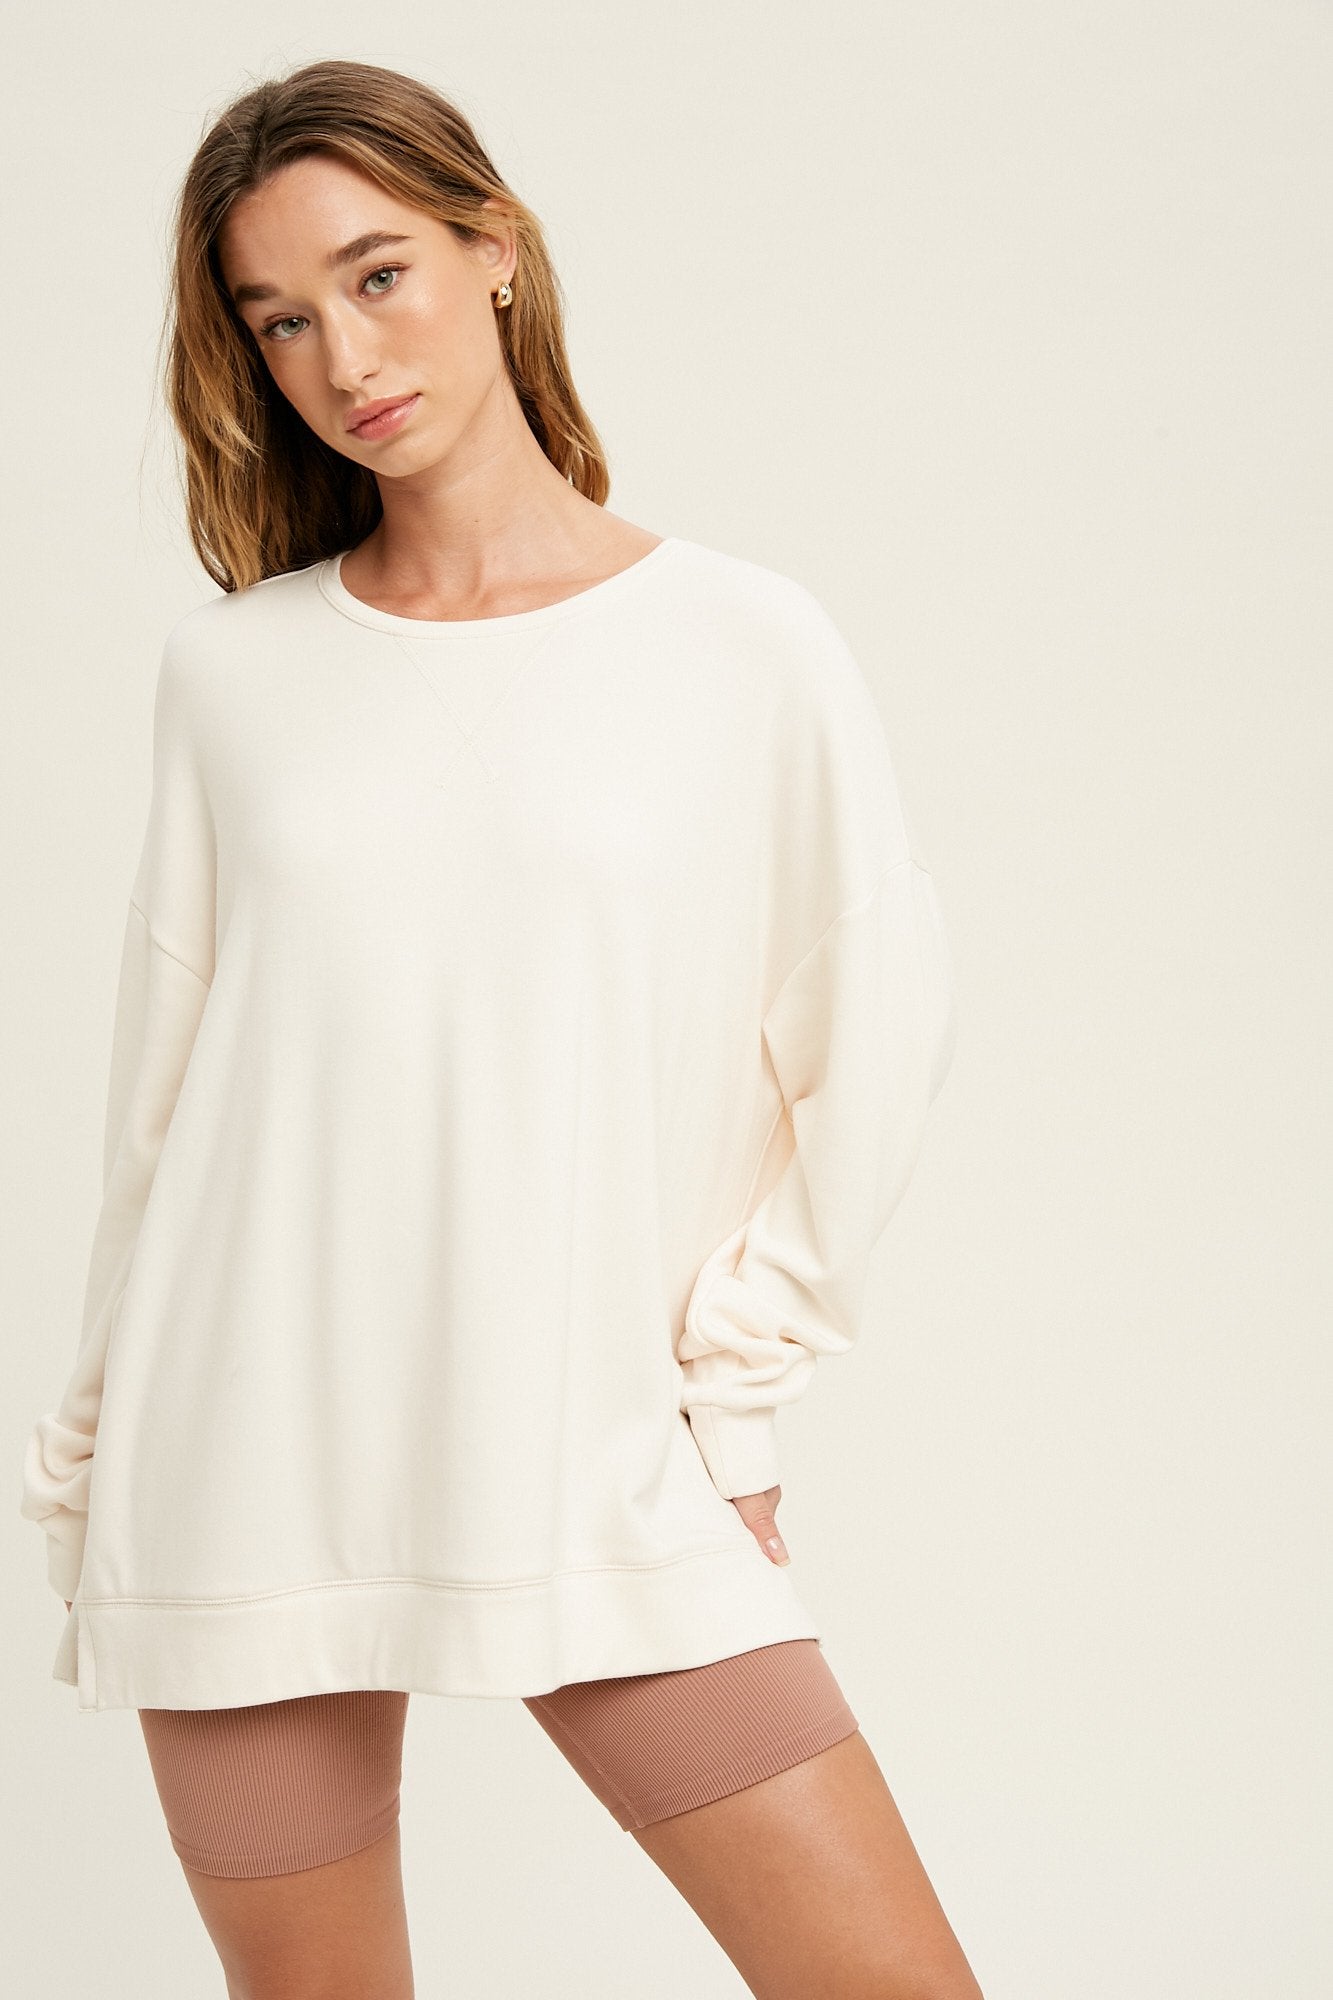 Oversized French Terry sweatshirt with side slits  Ivy and Pearl Boutique Cream M/L 